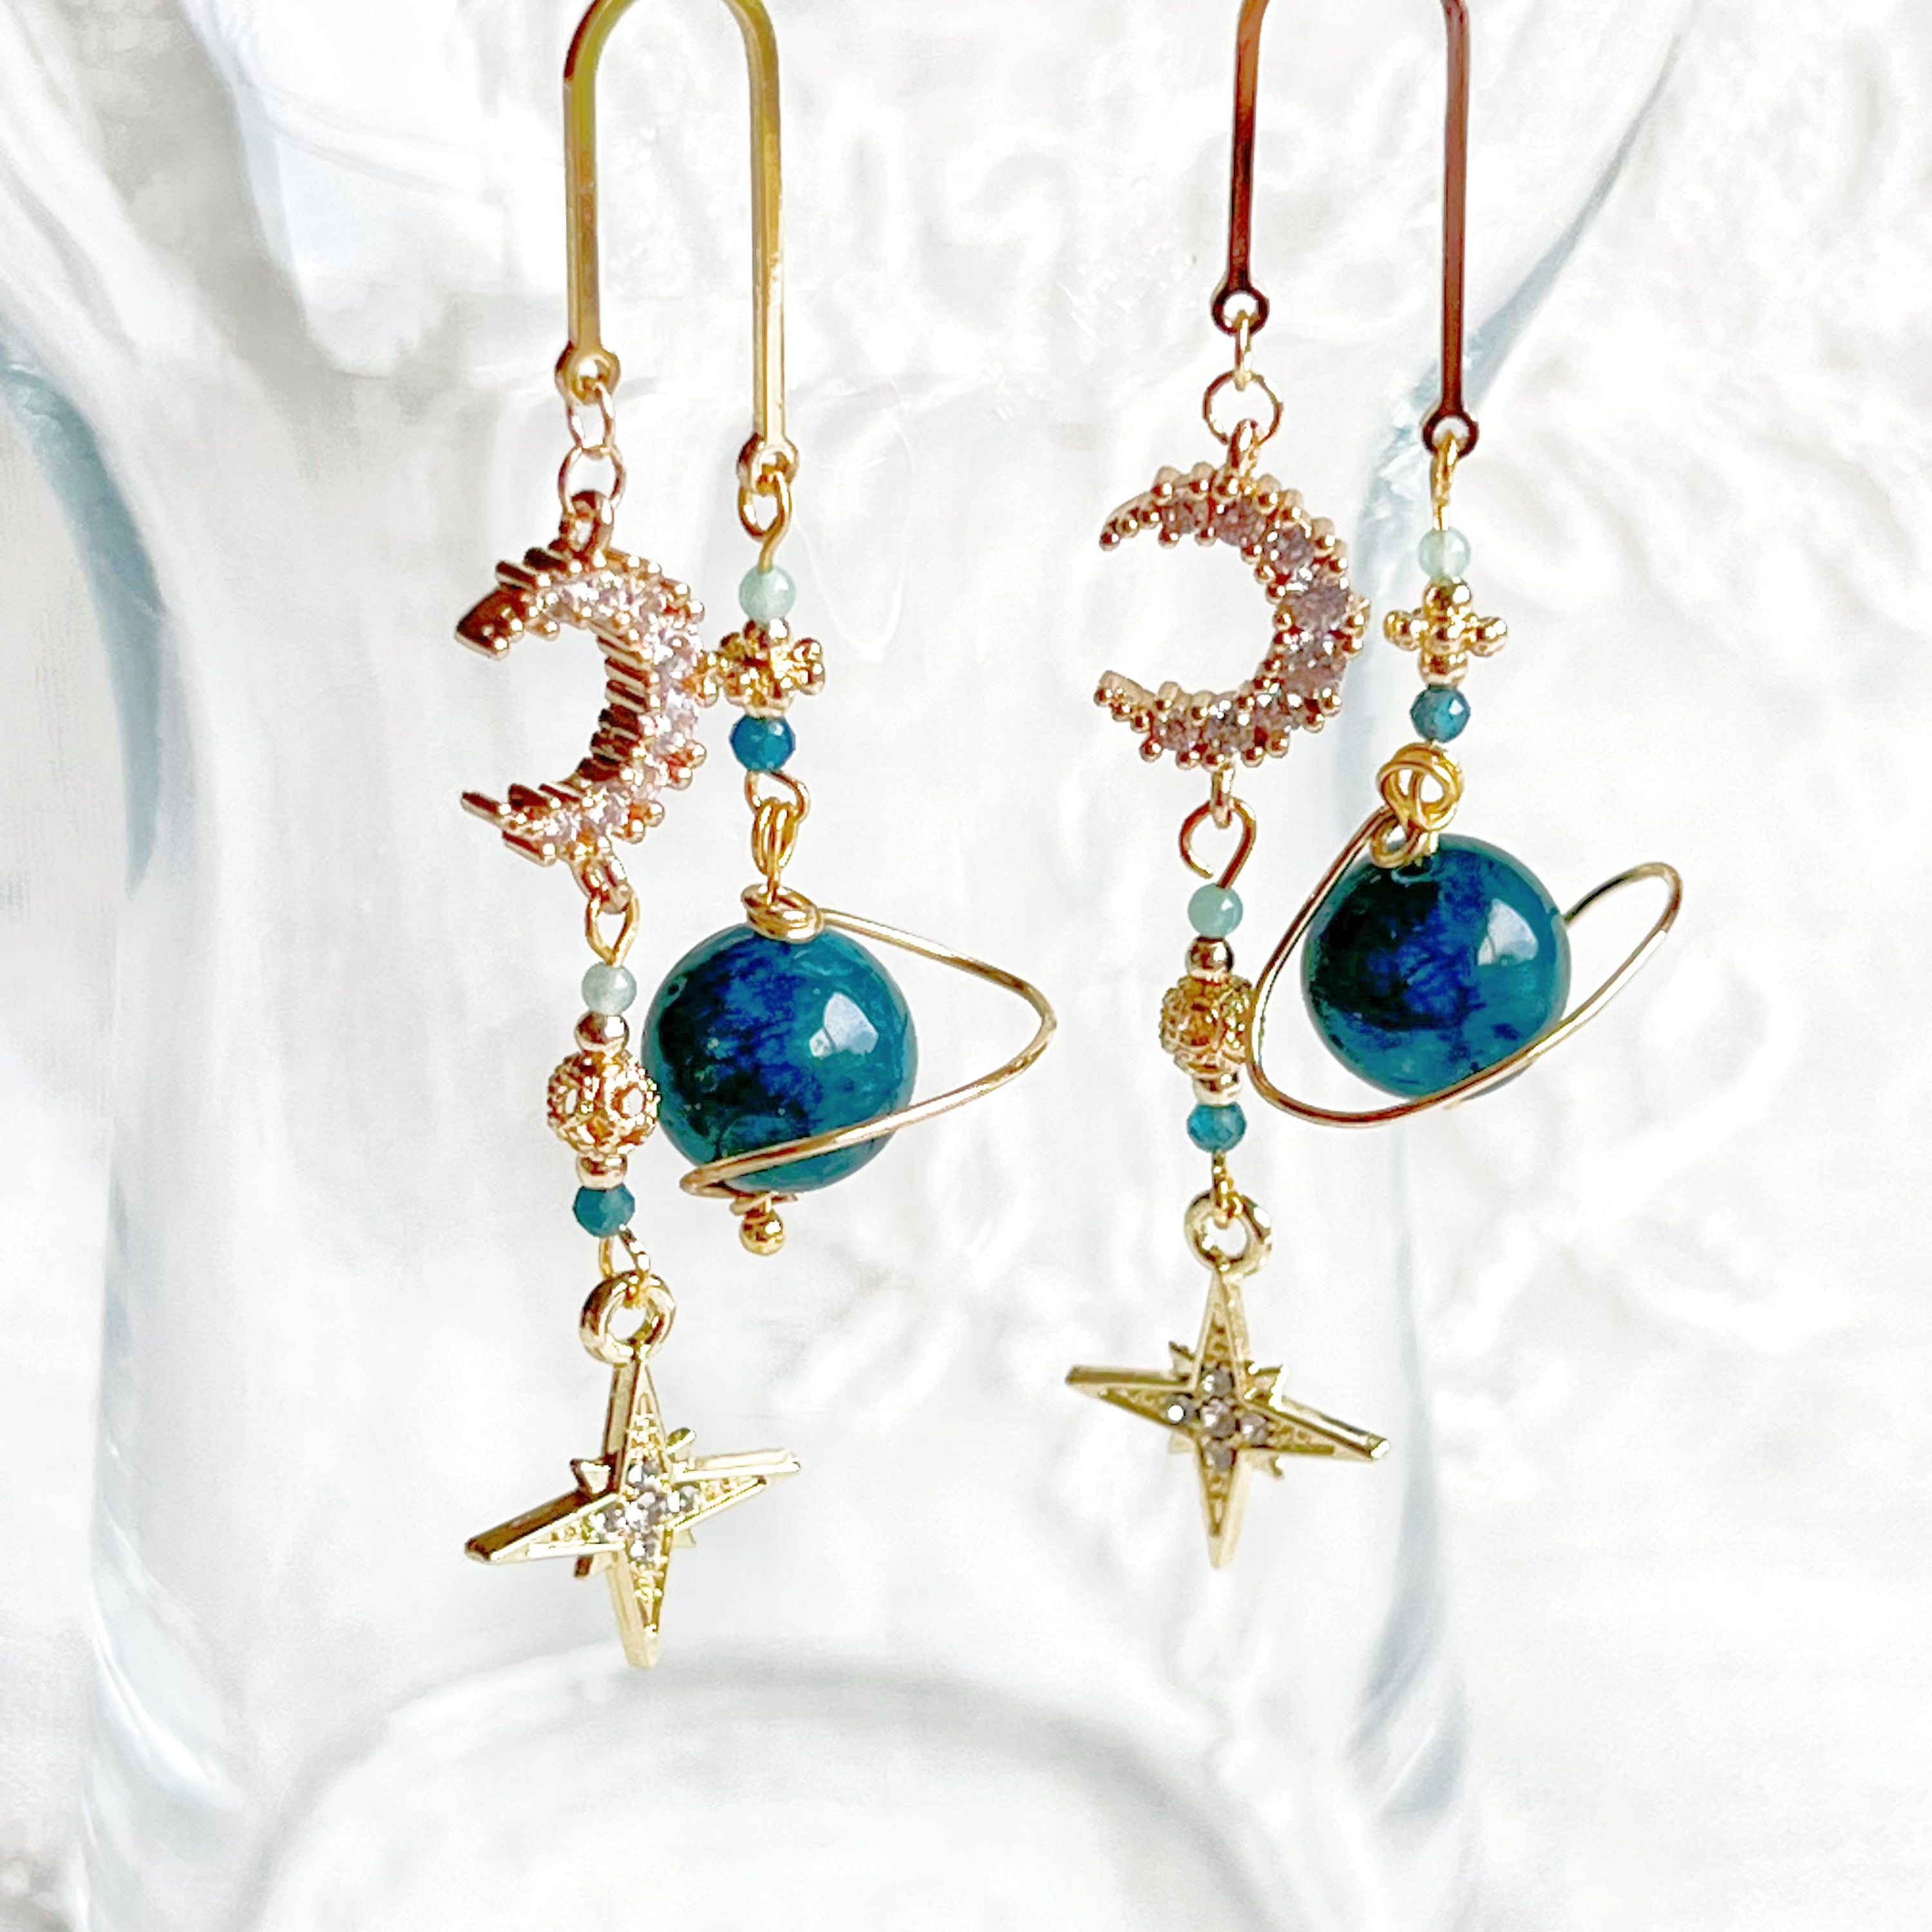 Green Apatite Planet Moon and North Star Drop Earrings - Jewelry & Watches - Bijou Her -  -  - 